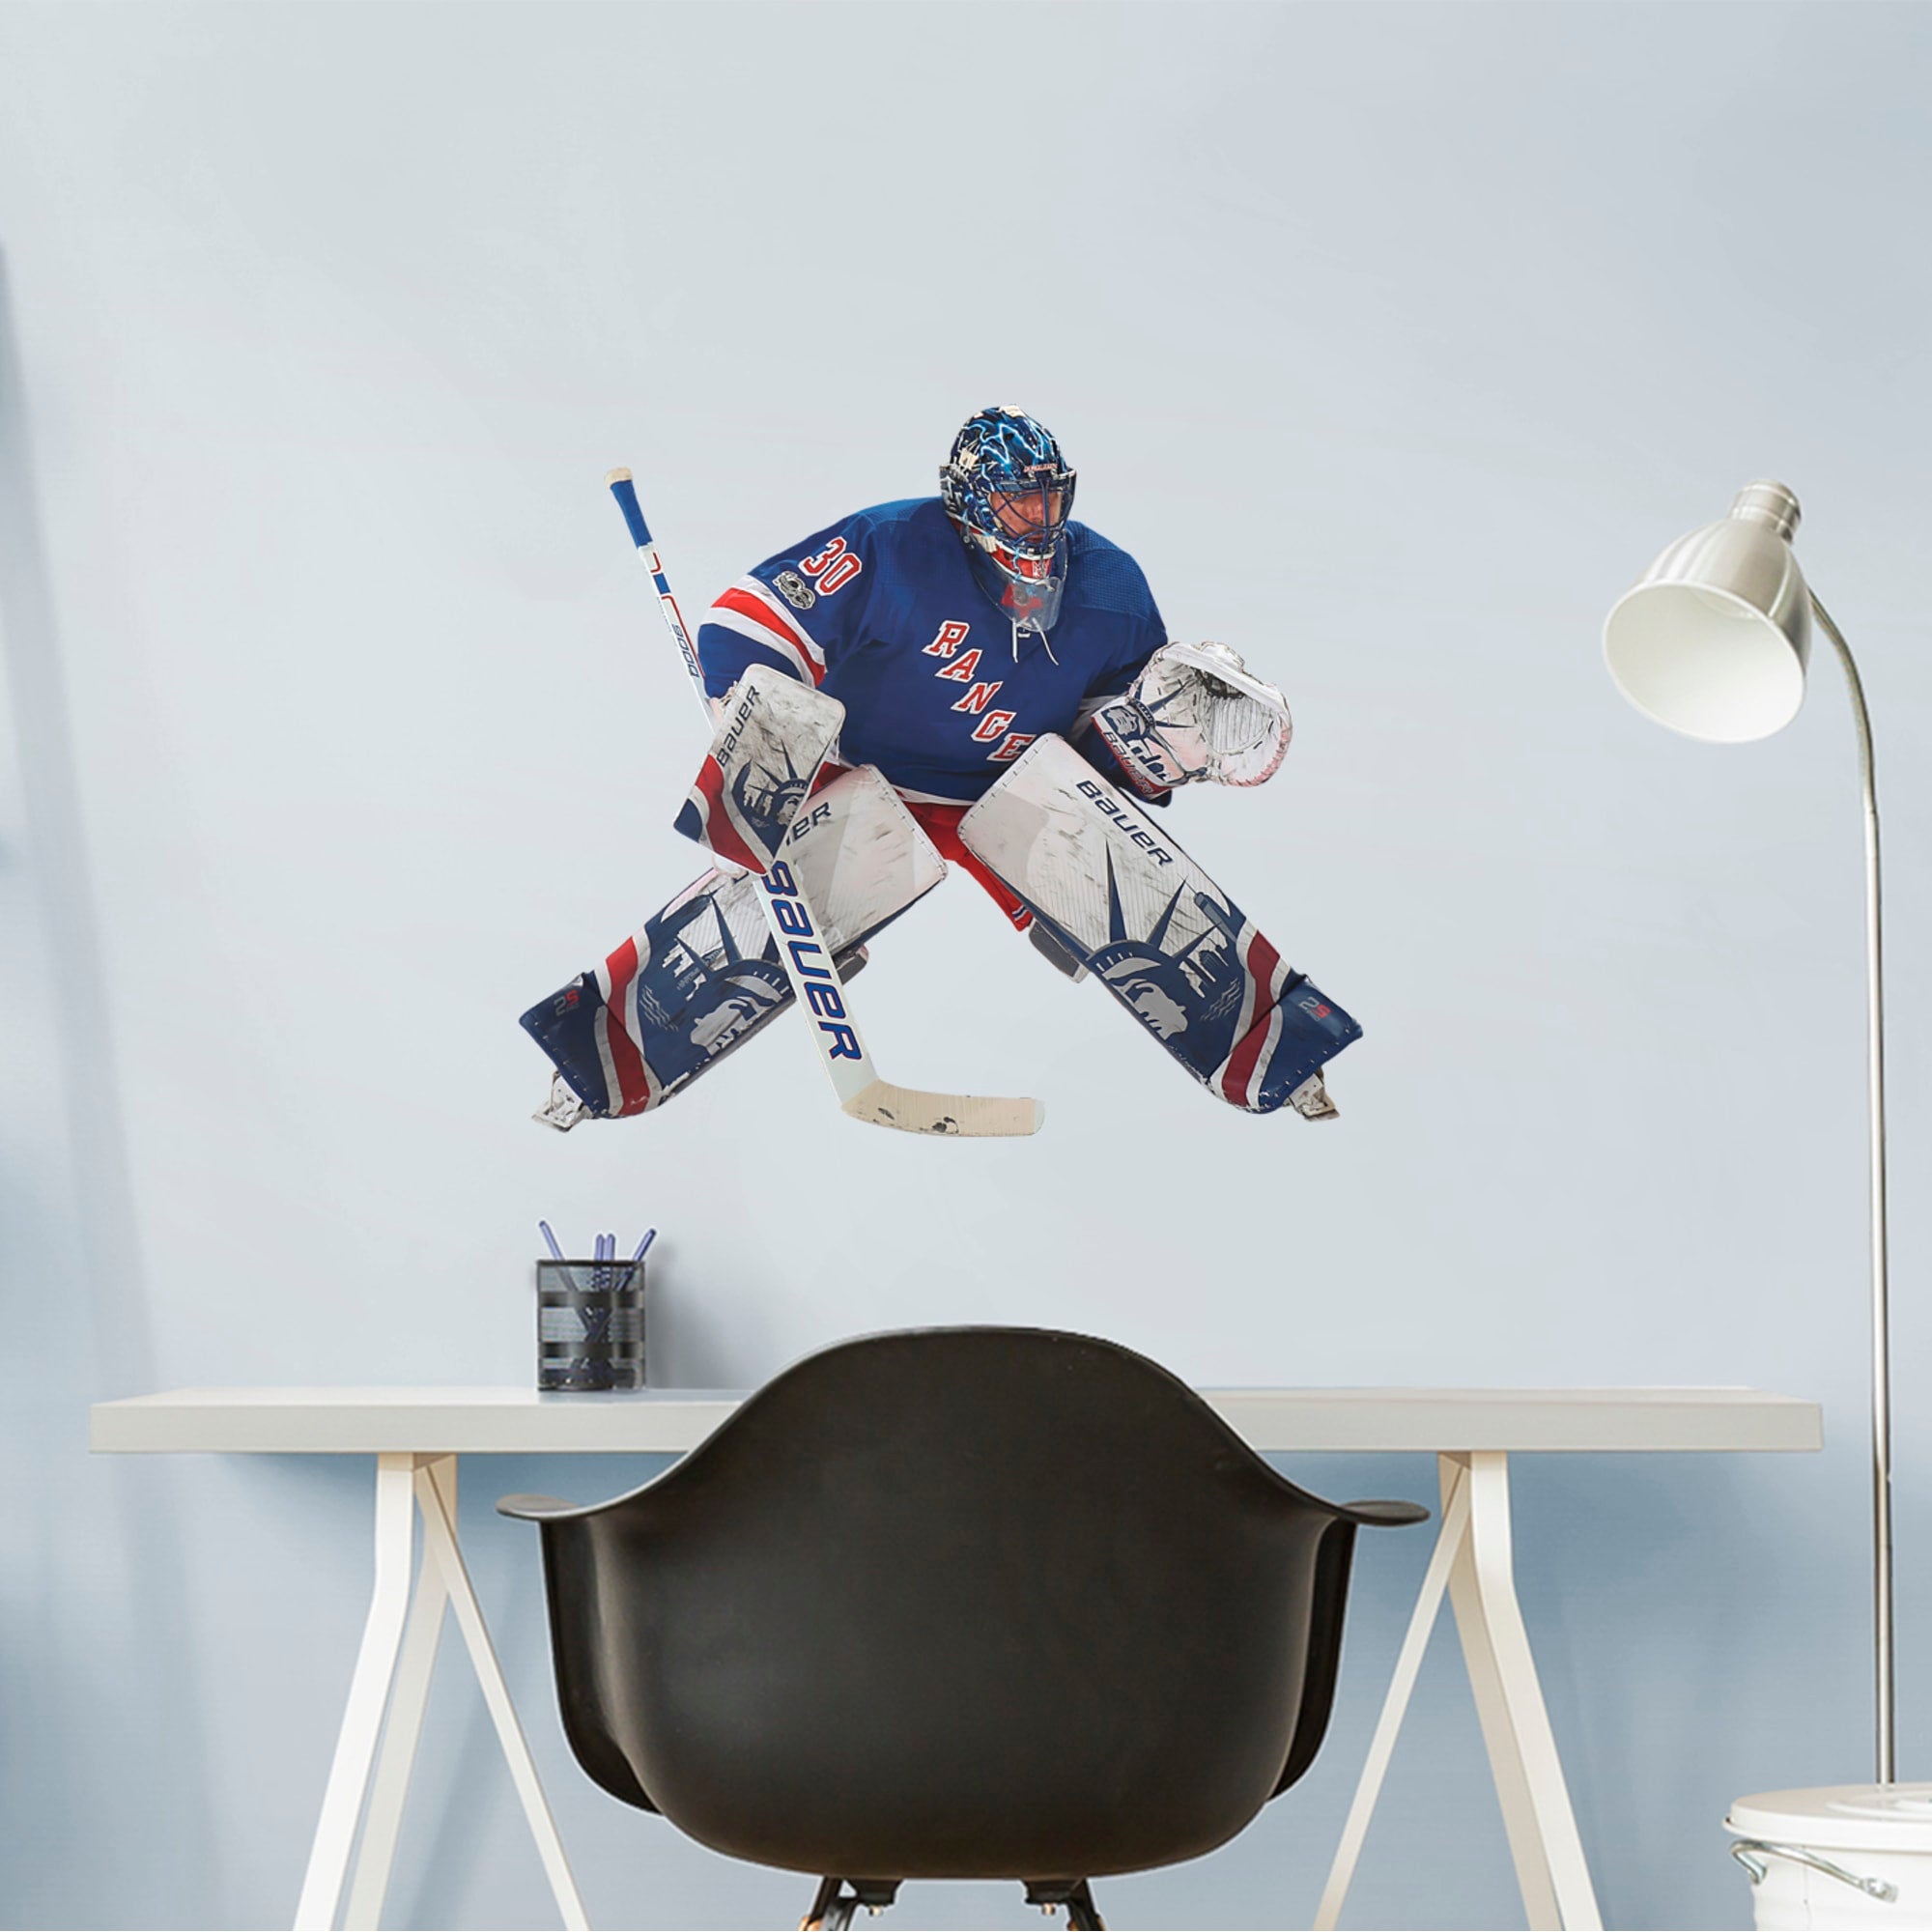 Henrik Lundqvist for New York Rangers - Officially Licensed NHL Removable Wall Decal 29.0"W x 25.0"H by Fathead | Vinyl